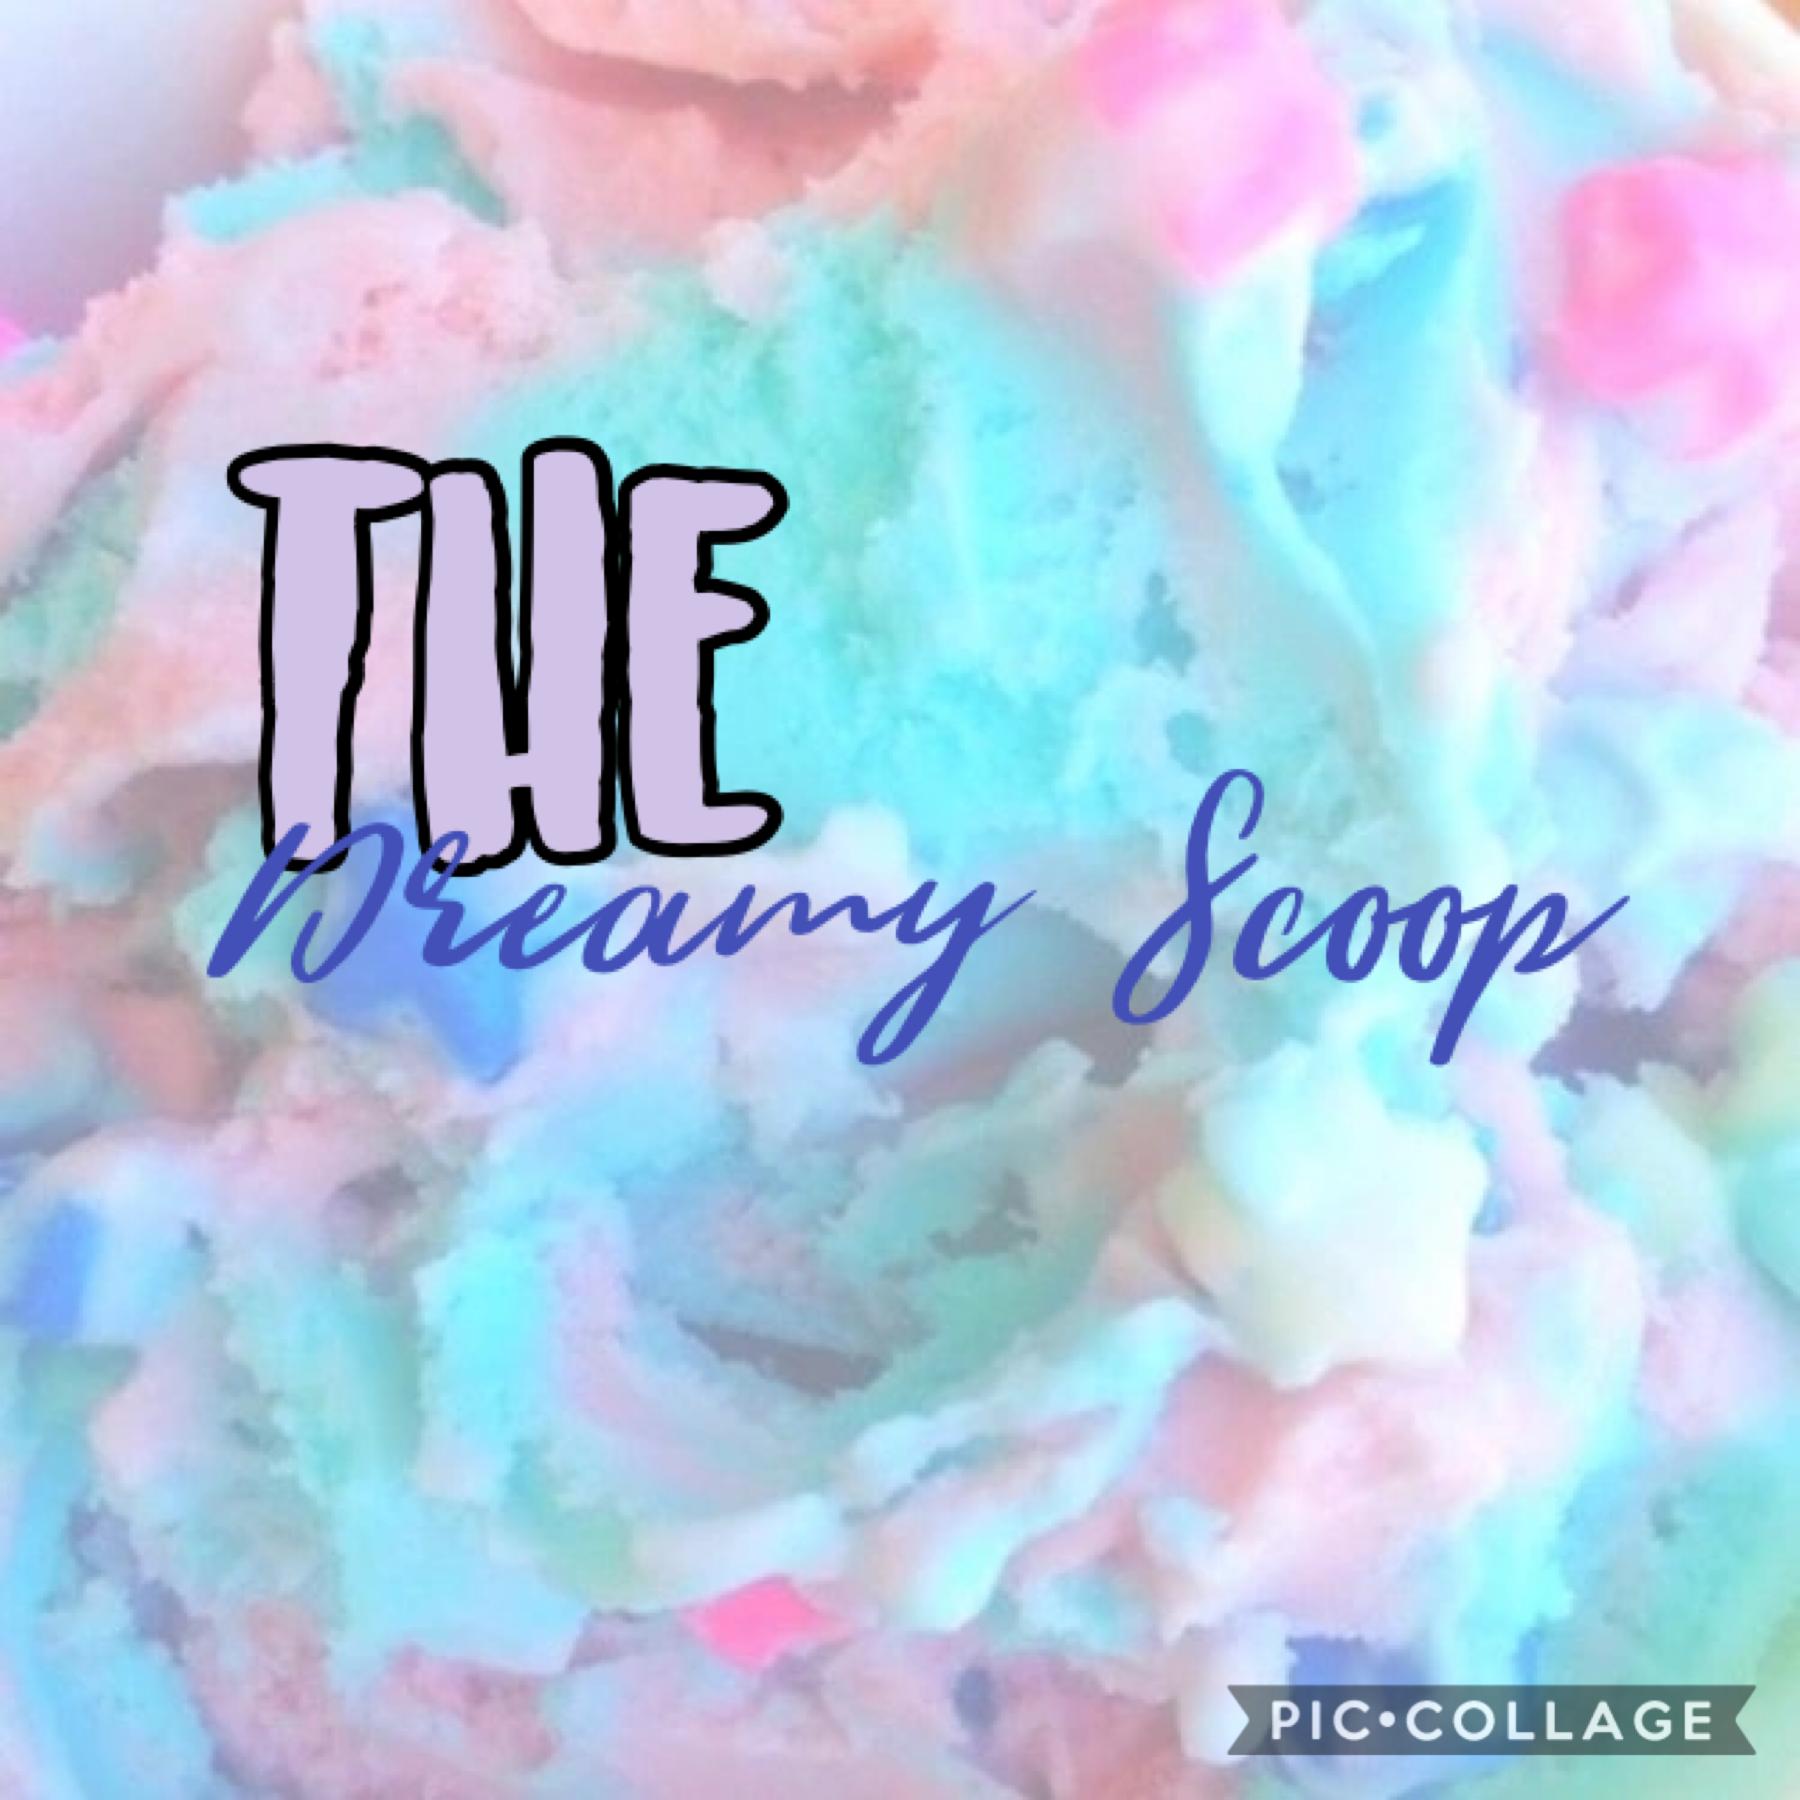 🍨 Tap 🍨
QOTC: What is your favorite type of ice cream?
AOTC: Choco chip cookie dough. 
Here is the first ever Dreamy Scoop news! Comment what you want me to add :) 